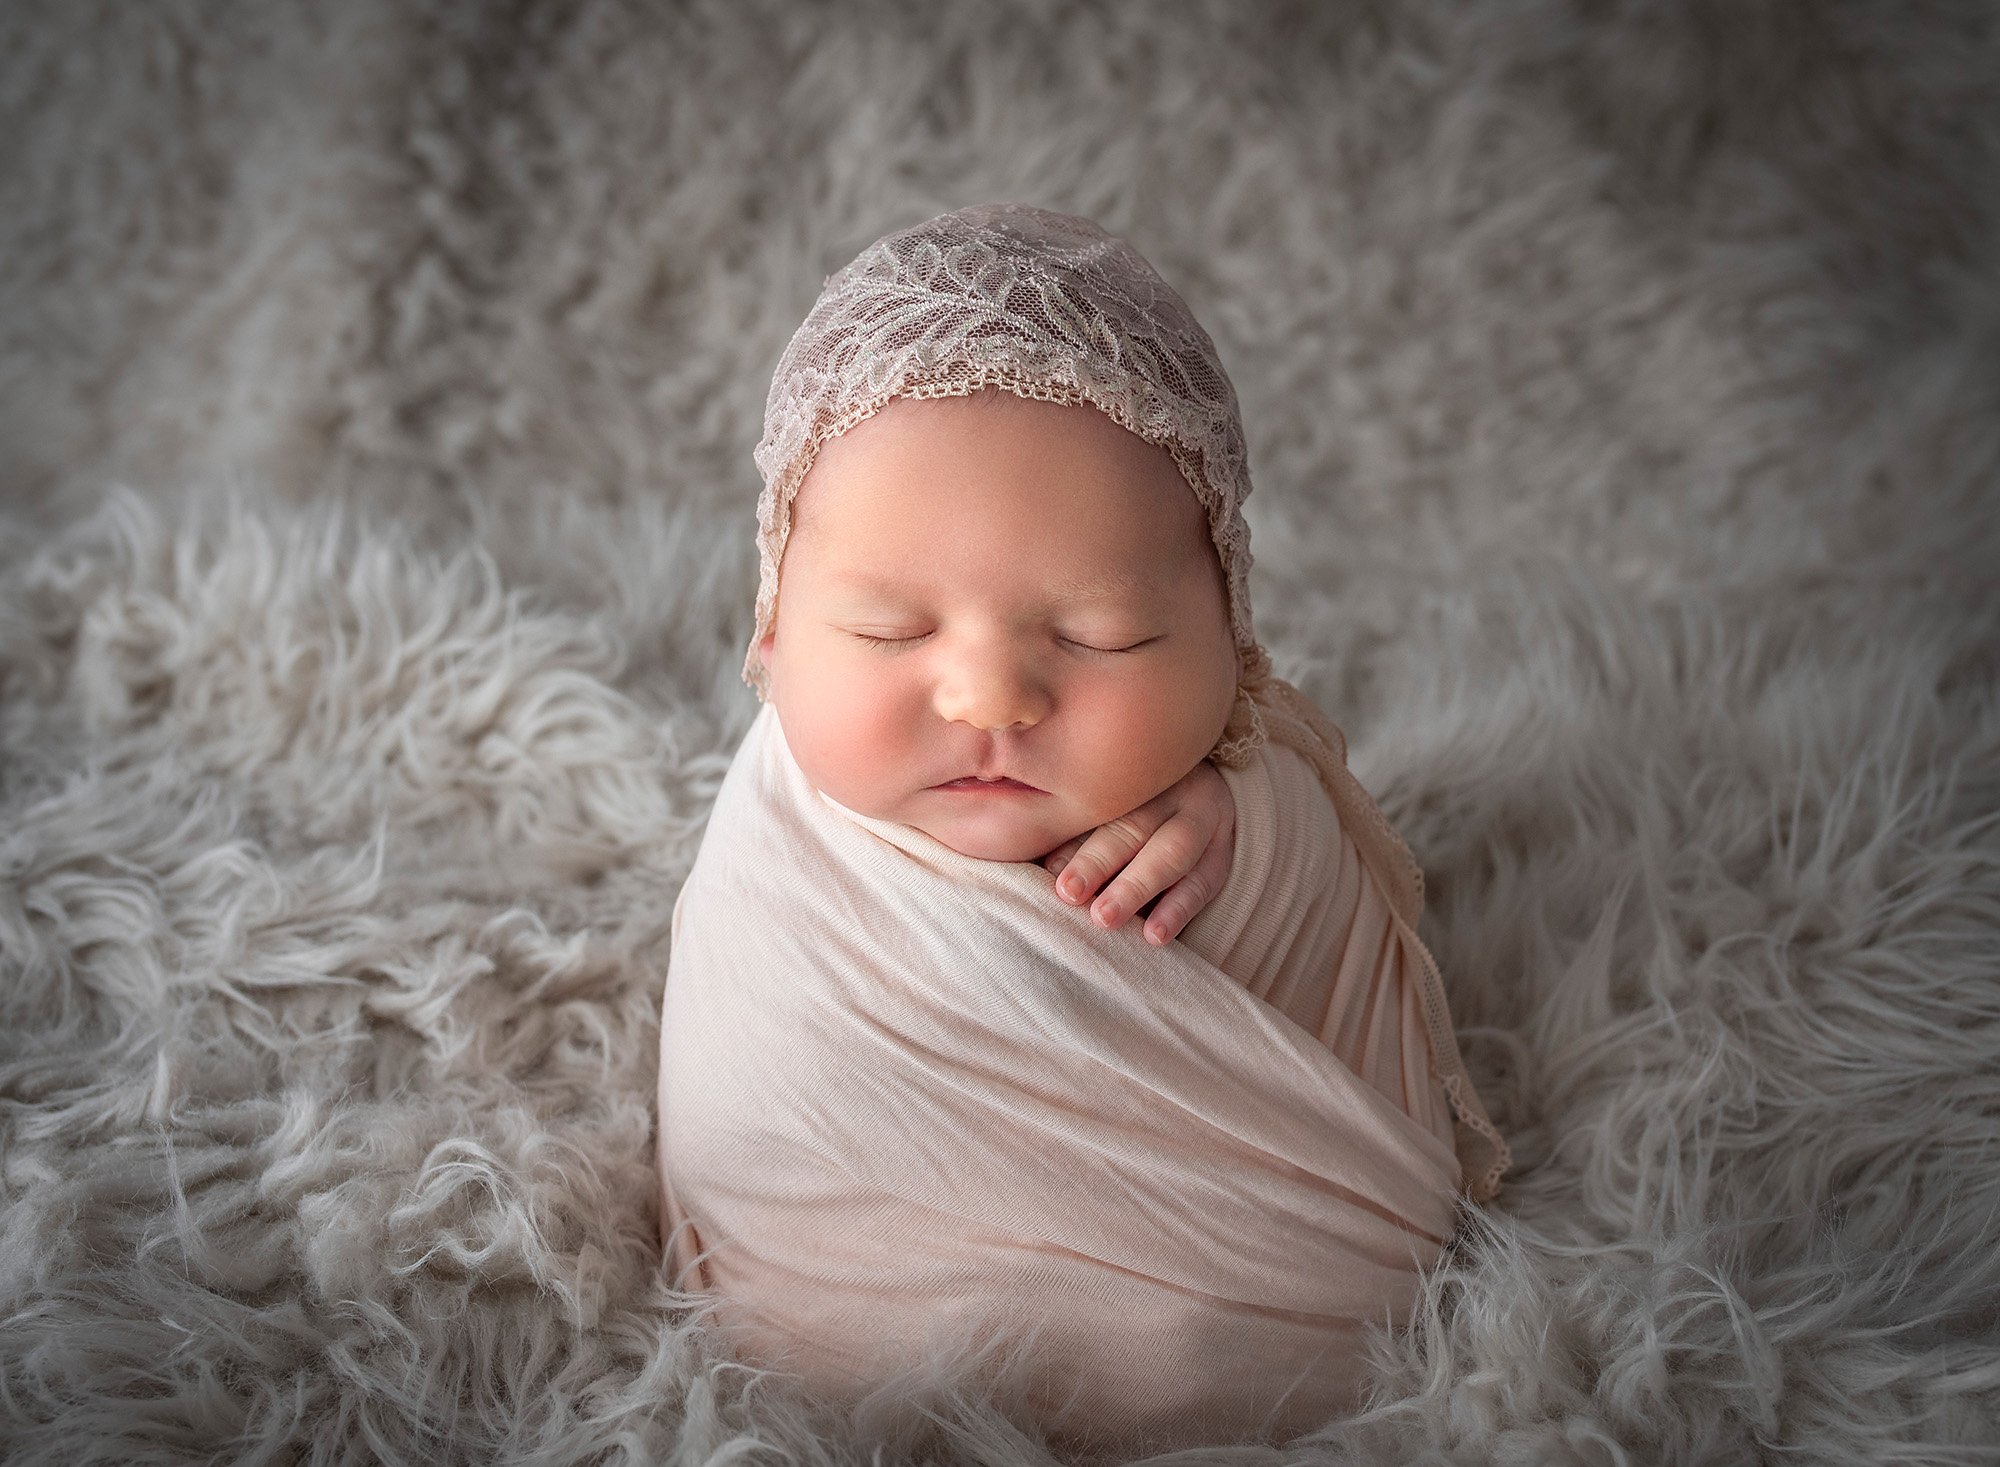 newborn baby girl sound asleep in soft pink wrap and laced bonnet on a fluffy blanket